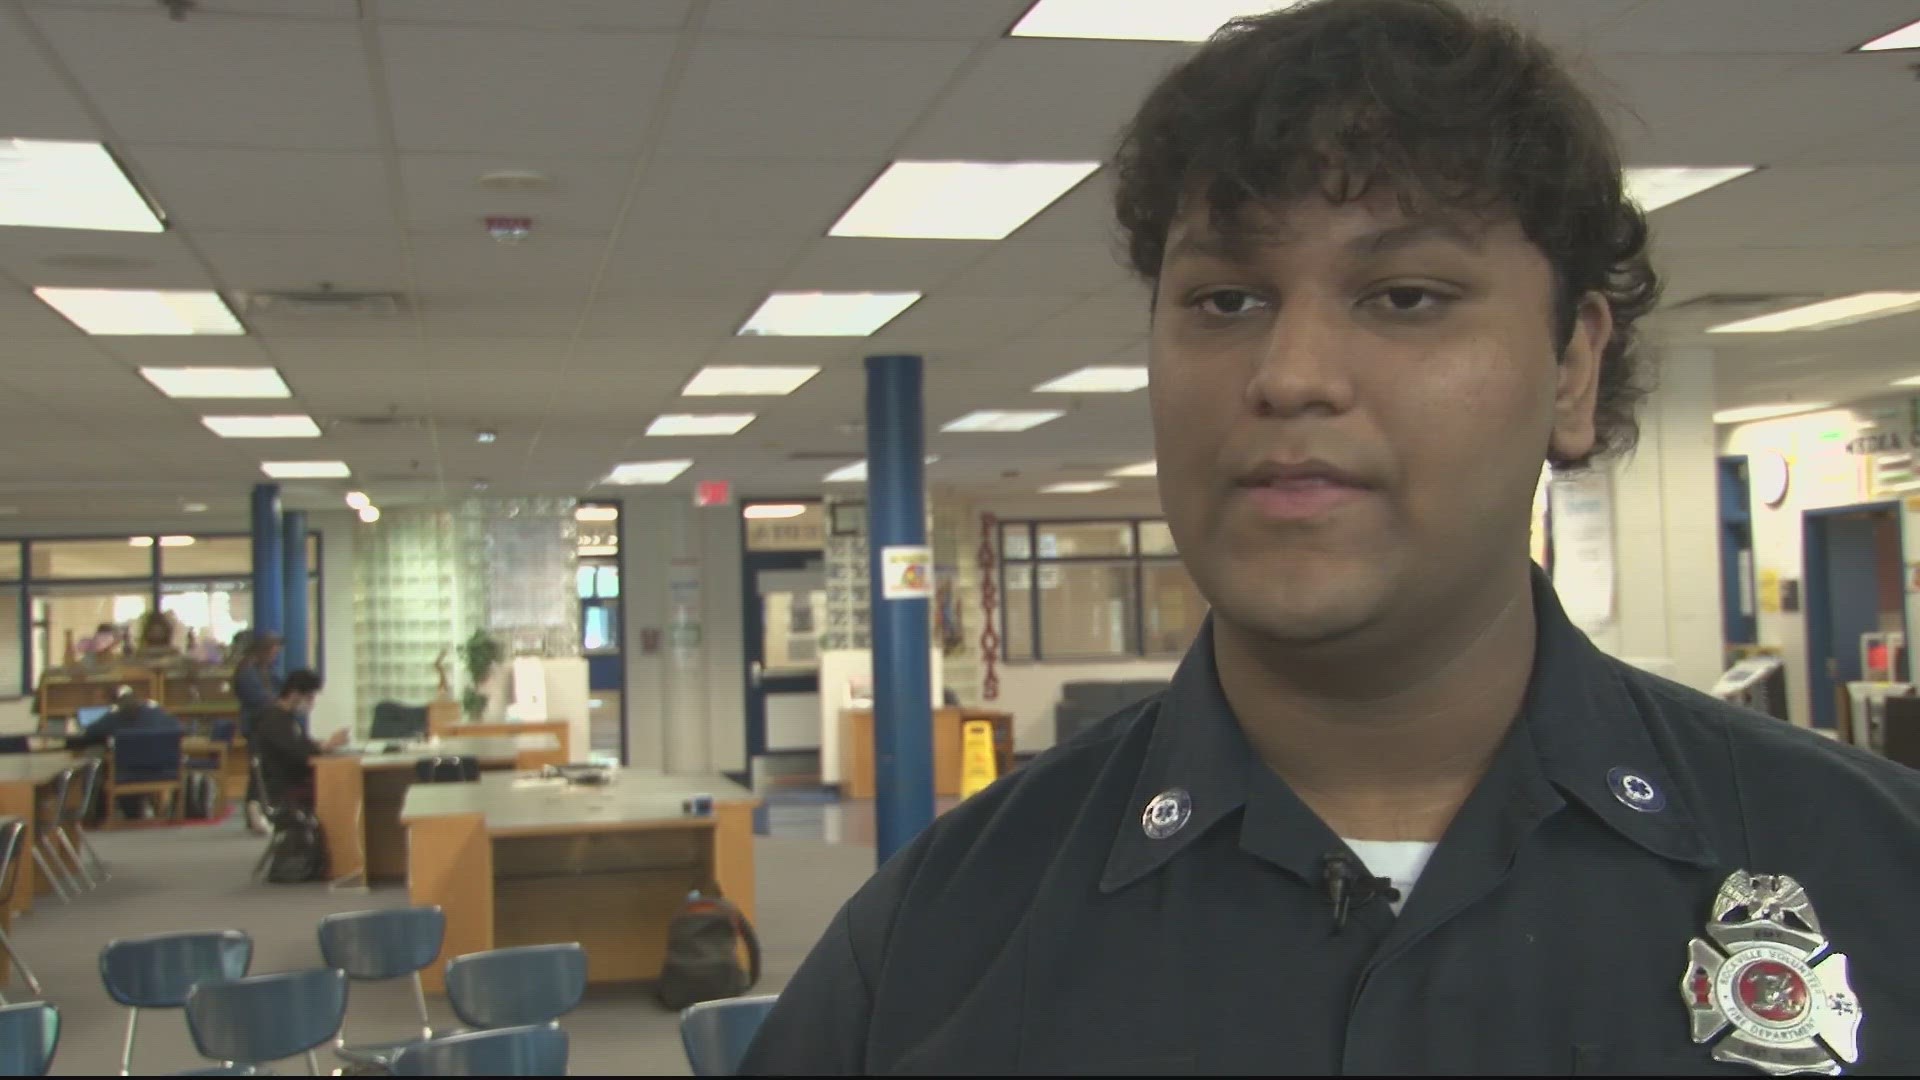 Wootton High School senior Vivek Majumdar was honored as a hero for his quick thinking under pressure that helped save the life of his best friend's grandfather.